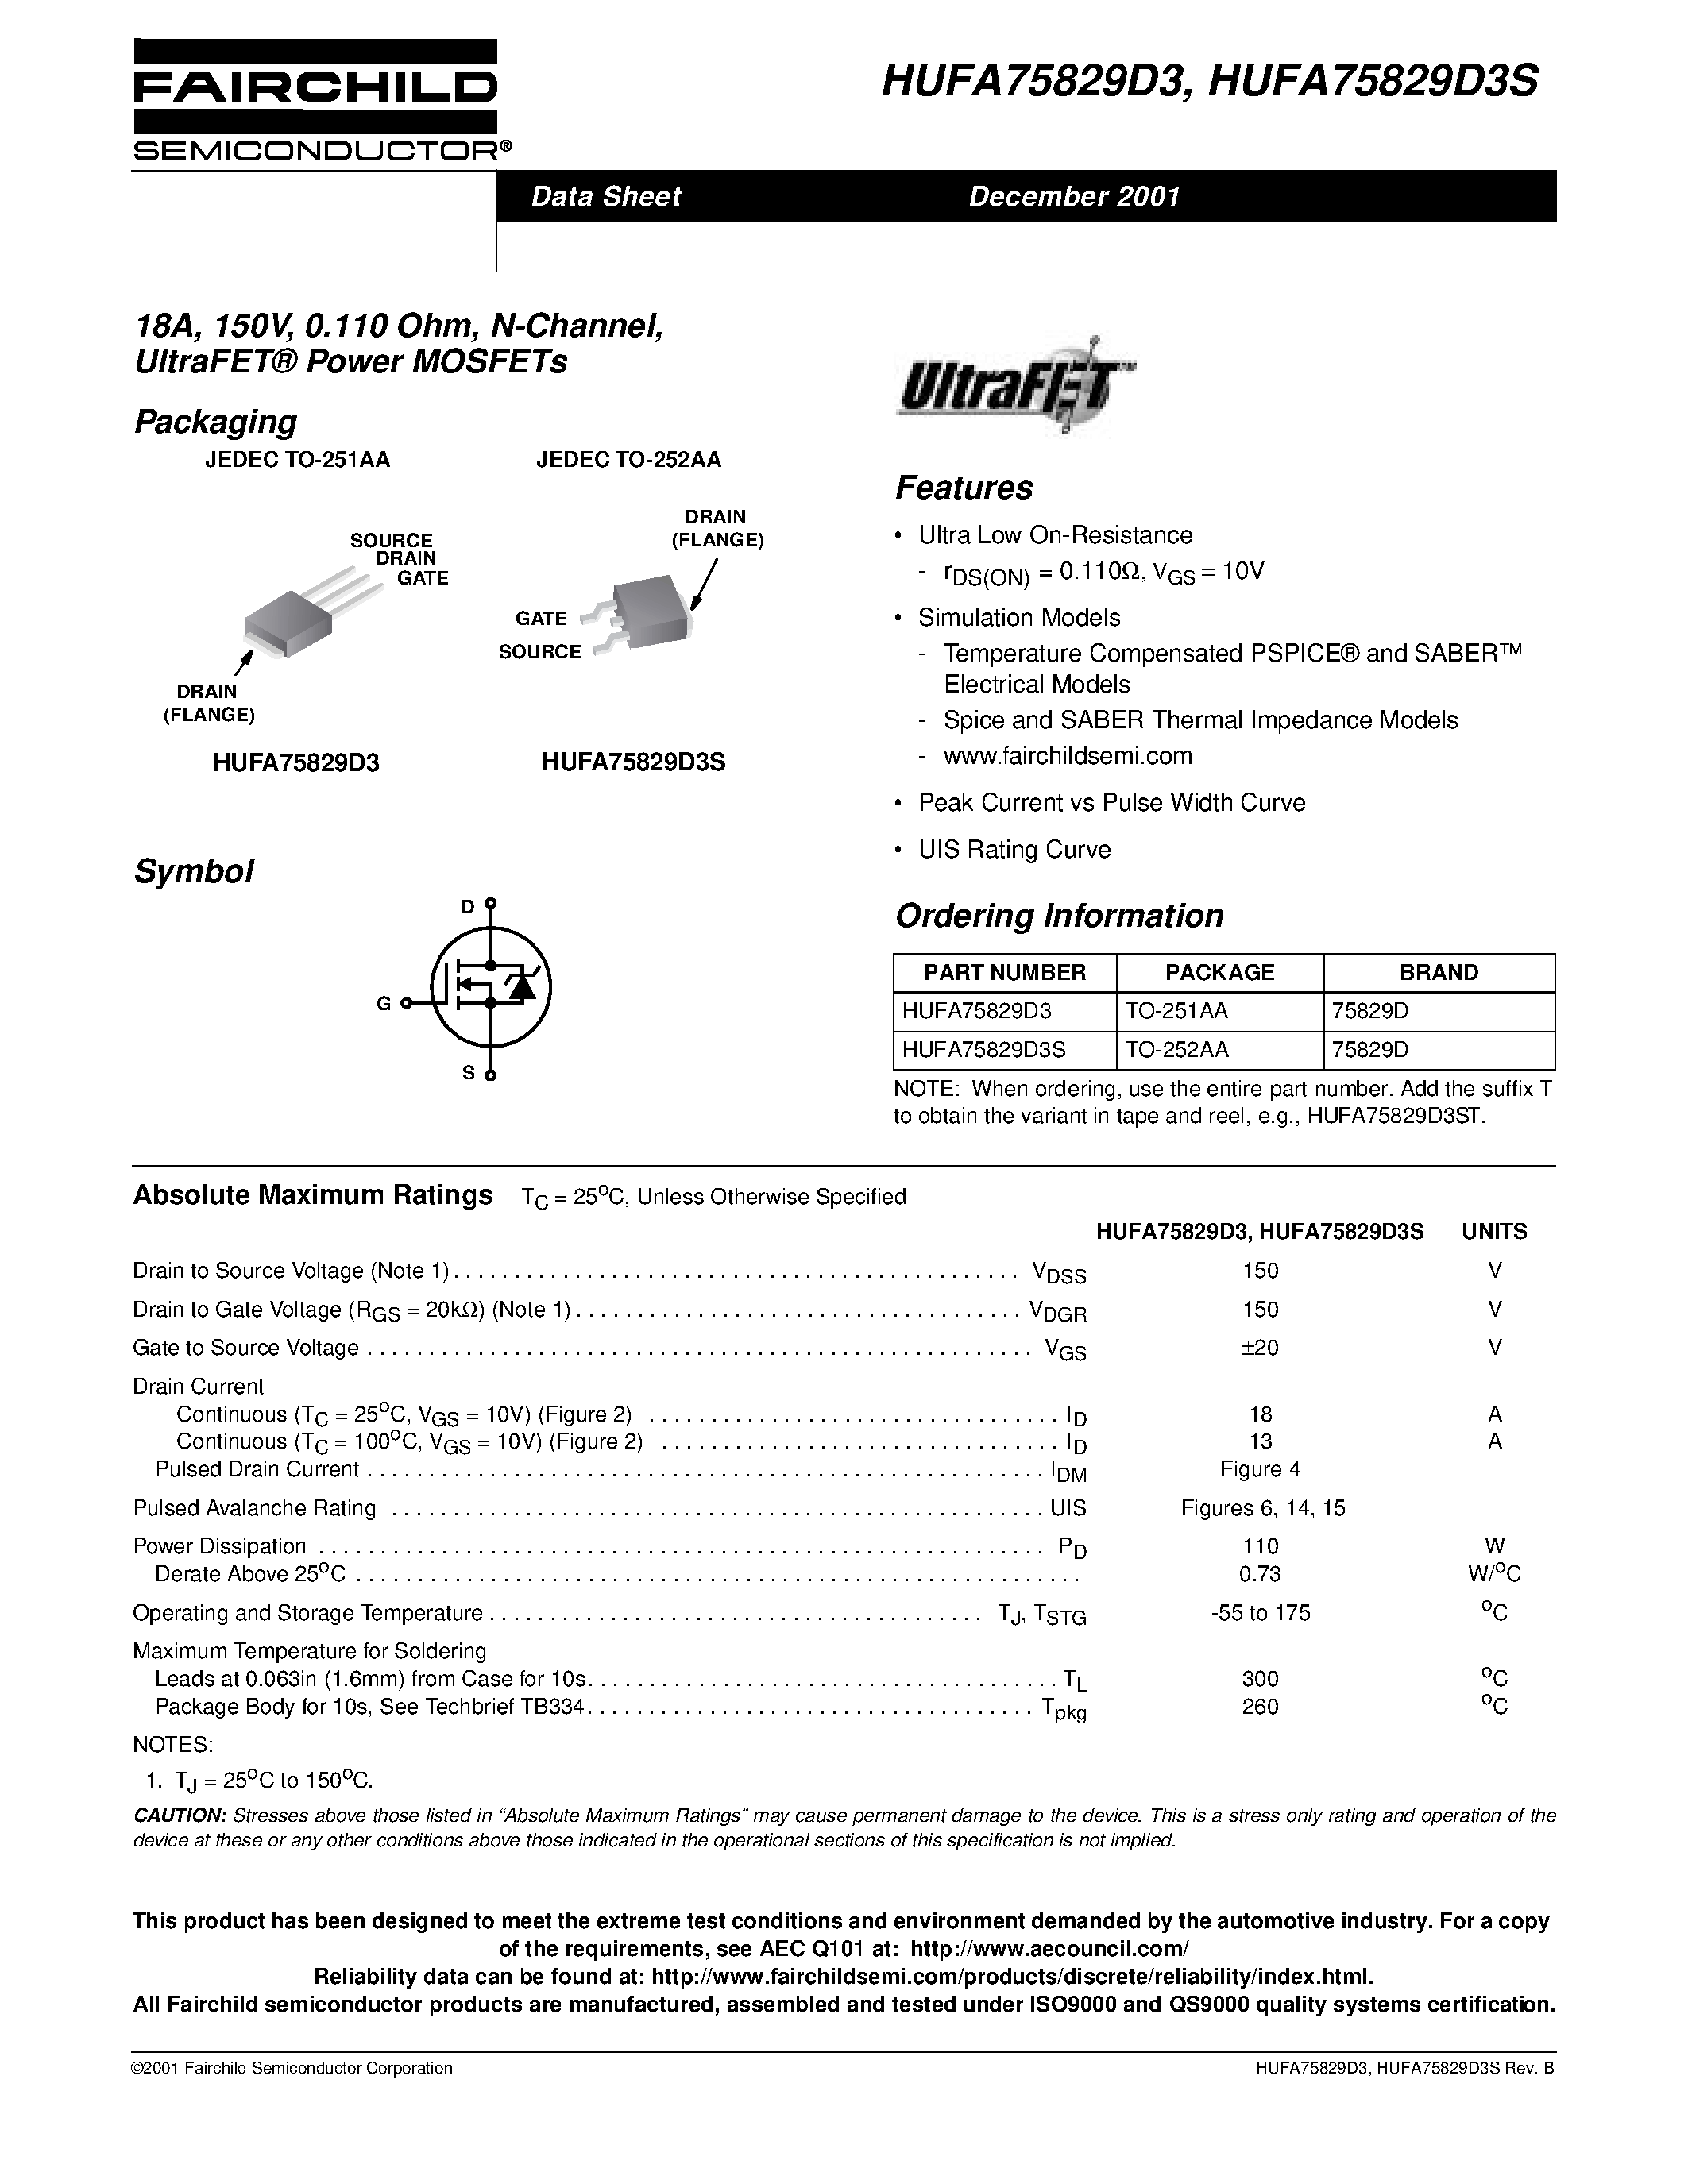 Datasheet HUFA75829D3S - 18A/ 150V/ 0.110 Ohm/ N-Channel/ UltraFET Power MOSFETs page 1